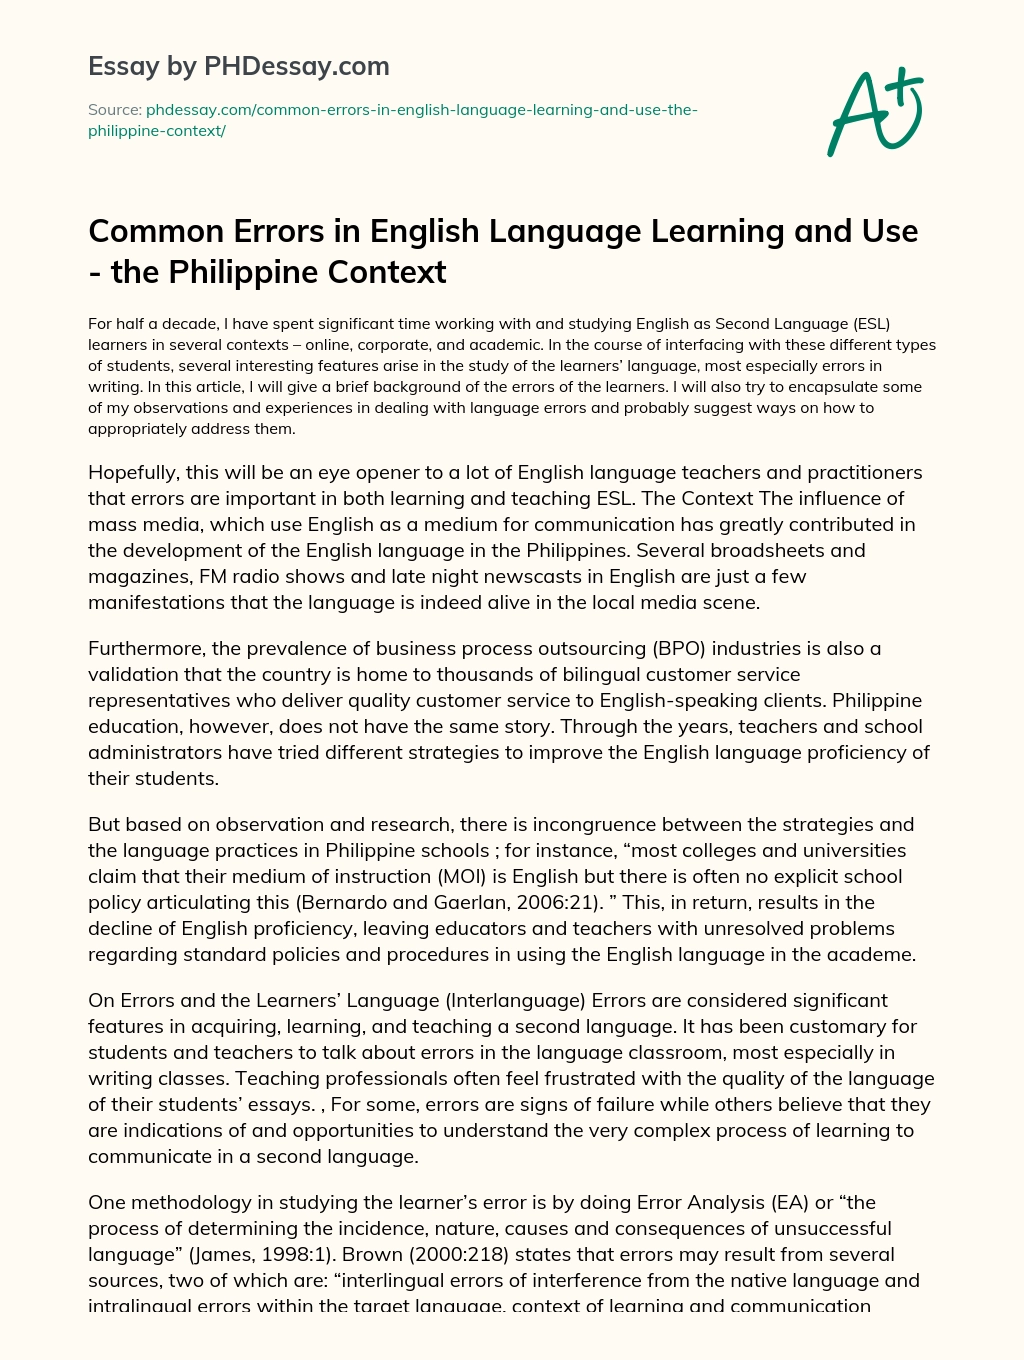 Common Errors in English Language Learning and Use – the Philippine Context essay